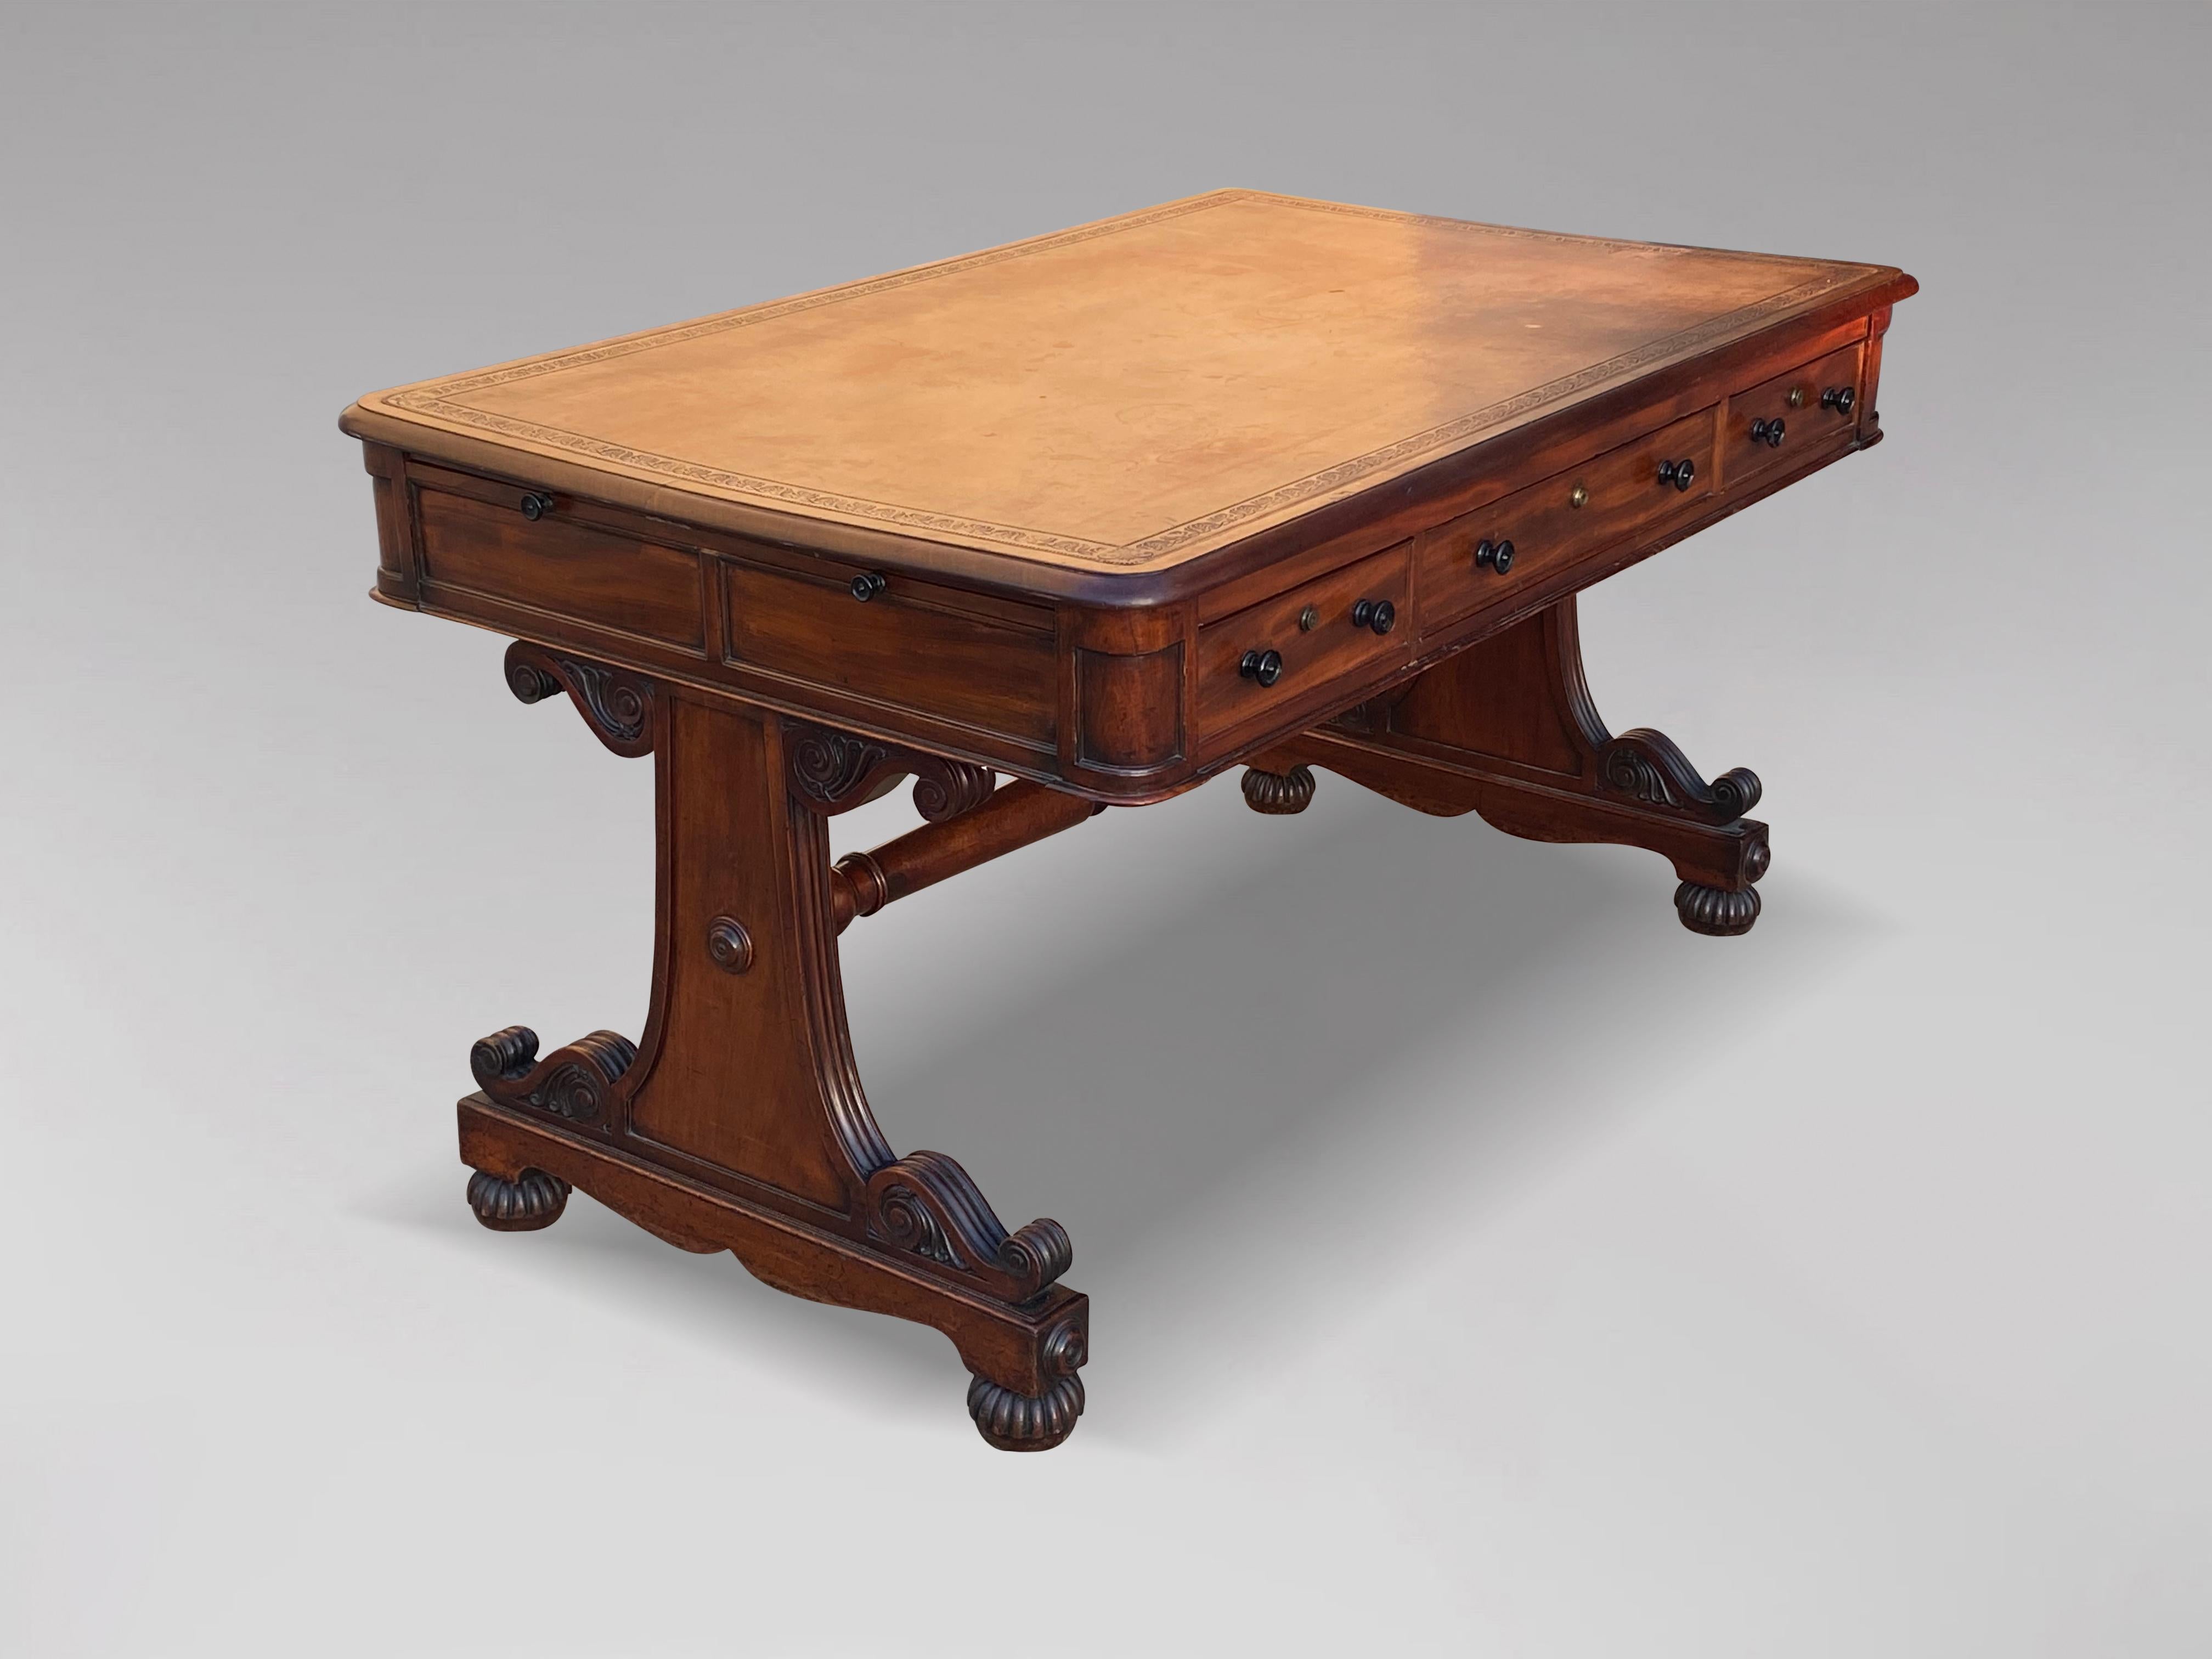 A stunning quality early 19th century William IV period mahogany partners writing table or library table. The moulded rectangular mahogany top with the original faded brown tooled leather top over three drawers on each side with sliding trays. Each